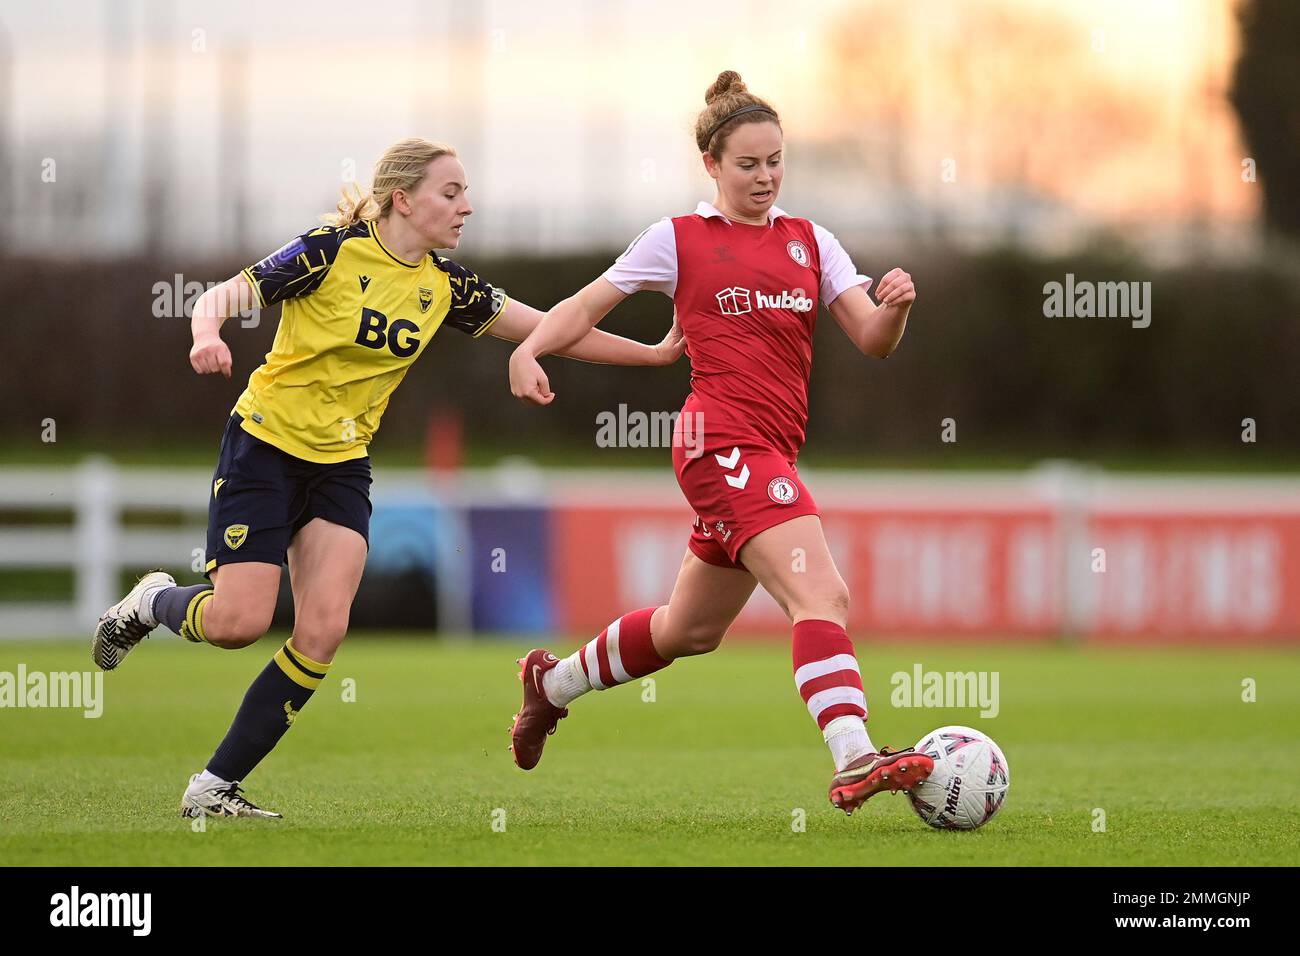 Bristol, UK. 29th January, 2023. Emily Syme of Bristol City Women under pressure from Carly Johns of Oxford United W.F.C. - Mandatory by-line: Ashley Crowden  - 29/01/2023 - FOOTBALL - Robins High Performance Centre - Bristol, England - Bristol City Women vs Oxford United Women - The Women's FA Cup - Fourth Round Credit: Ashley Crowden/Alamy Live News Stock Photo